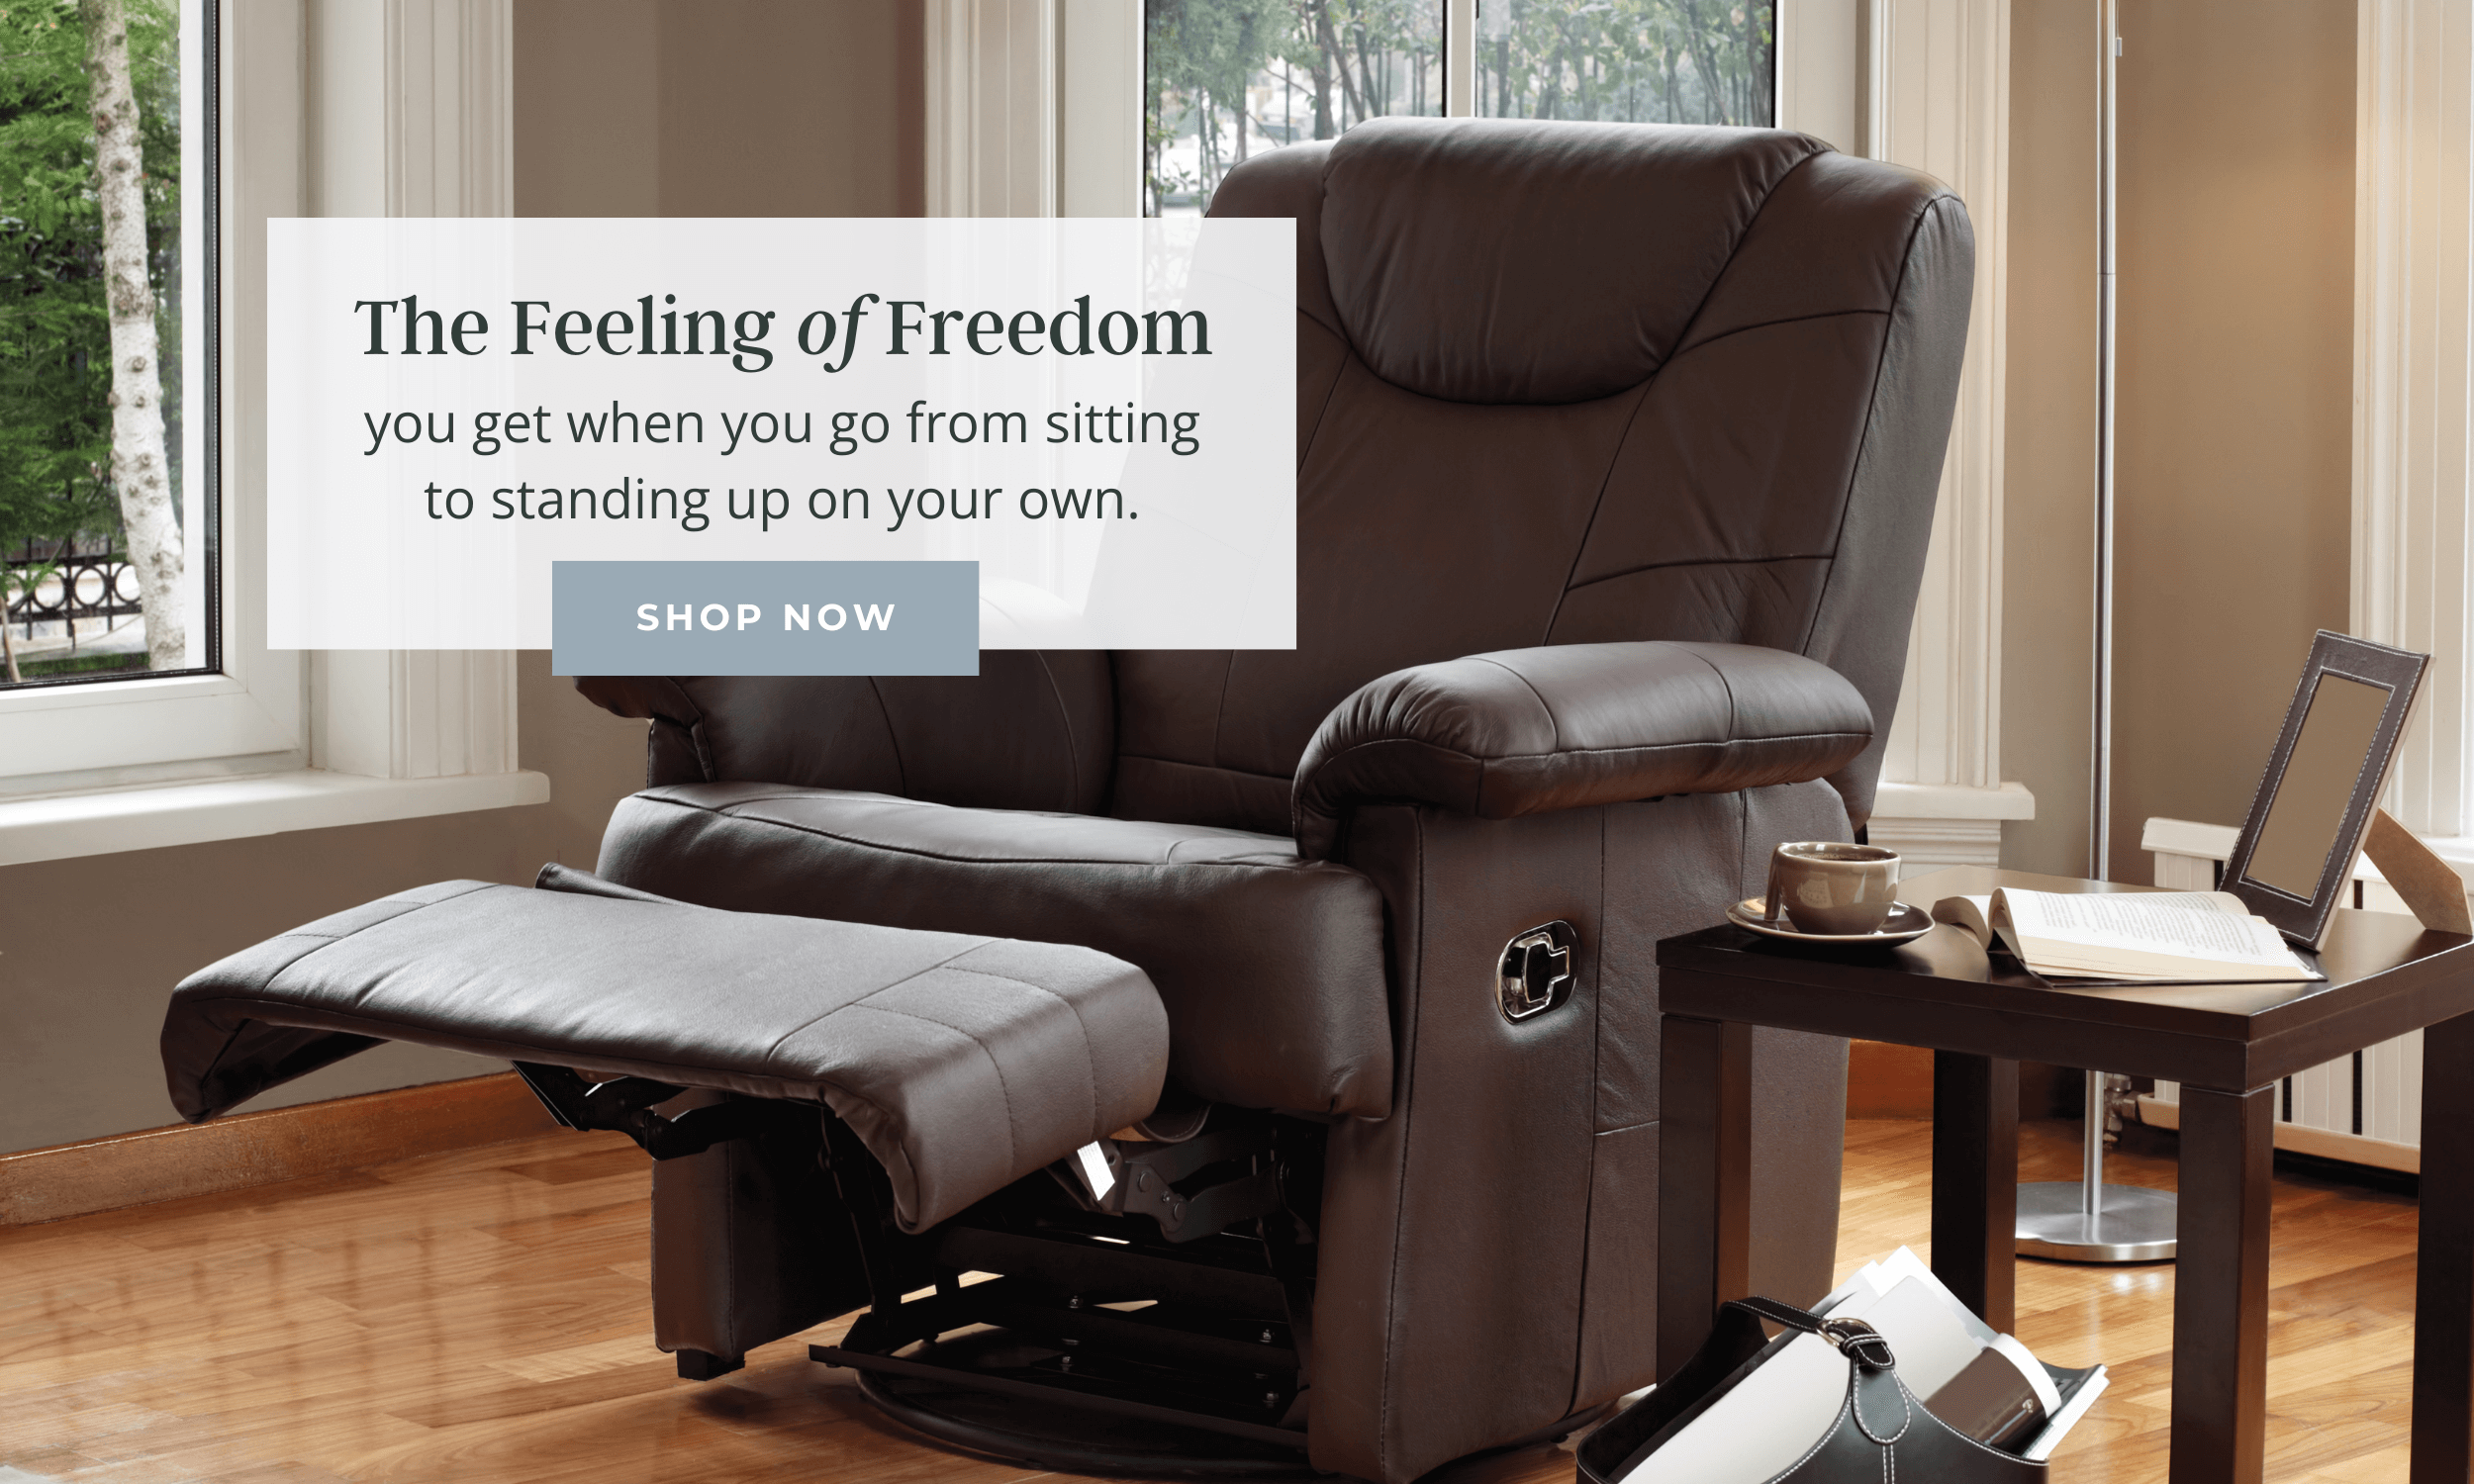 Intro to Lift Chair Heaven. Luxurious brown lift recliner with footrest elevated high. "The Feeling of Freedom" banner with 'Shop Now' button